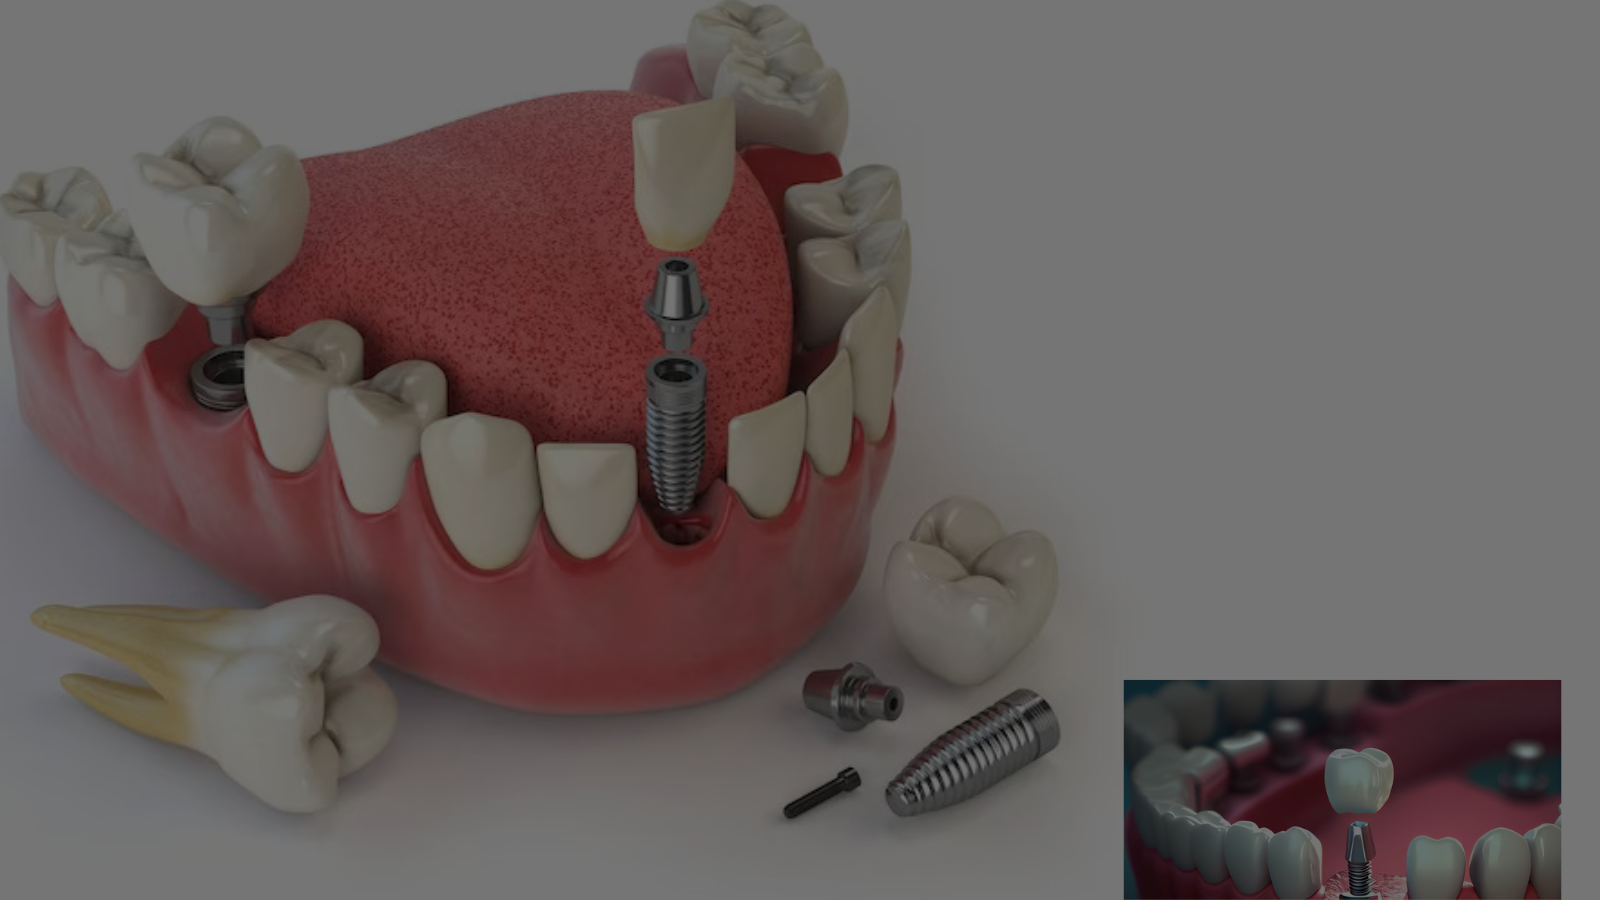 You are currently viewing Difference Between Temporary And Permanent Dental Implants in 2023-24